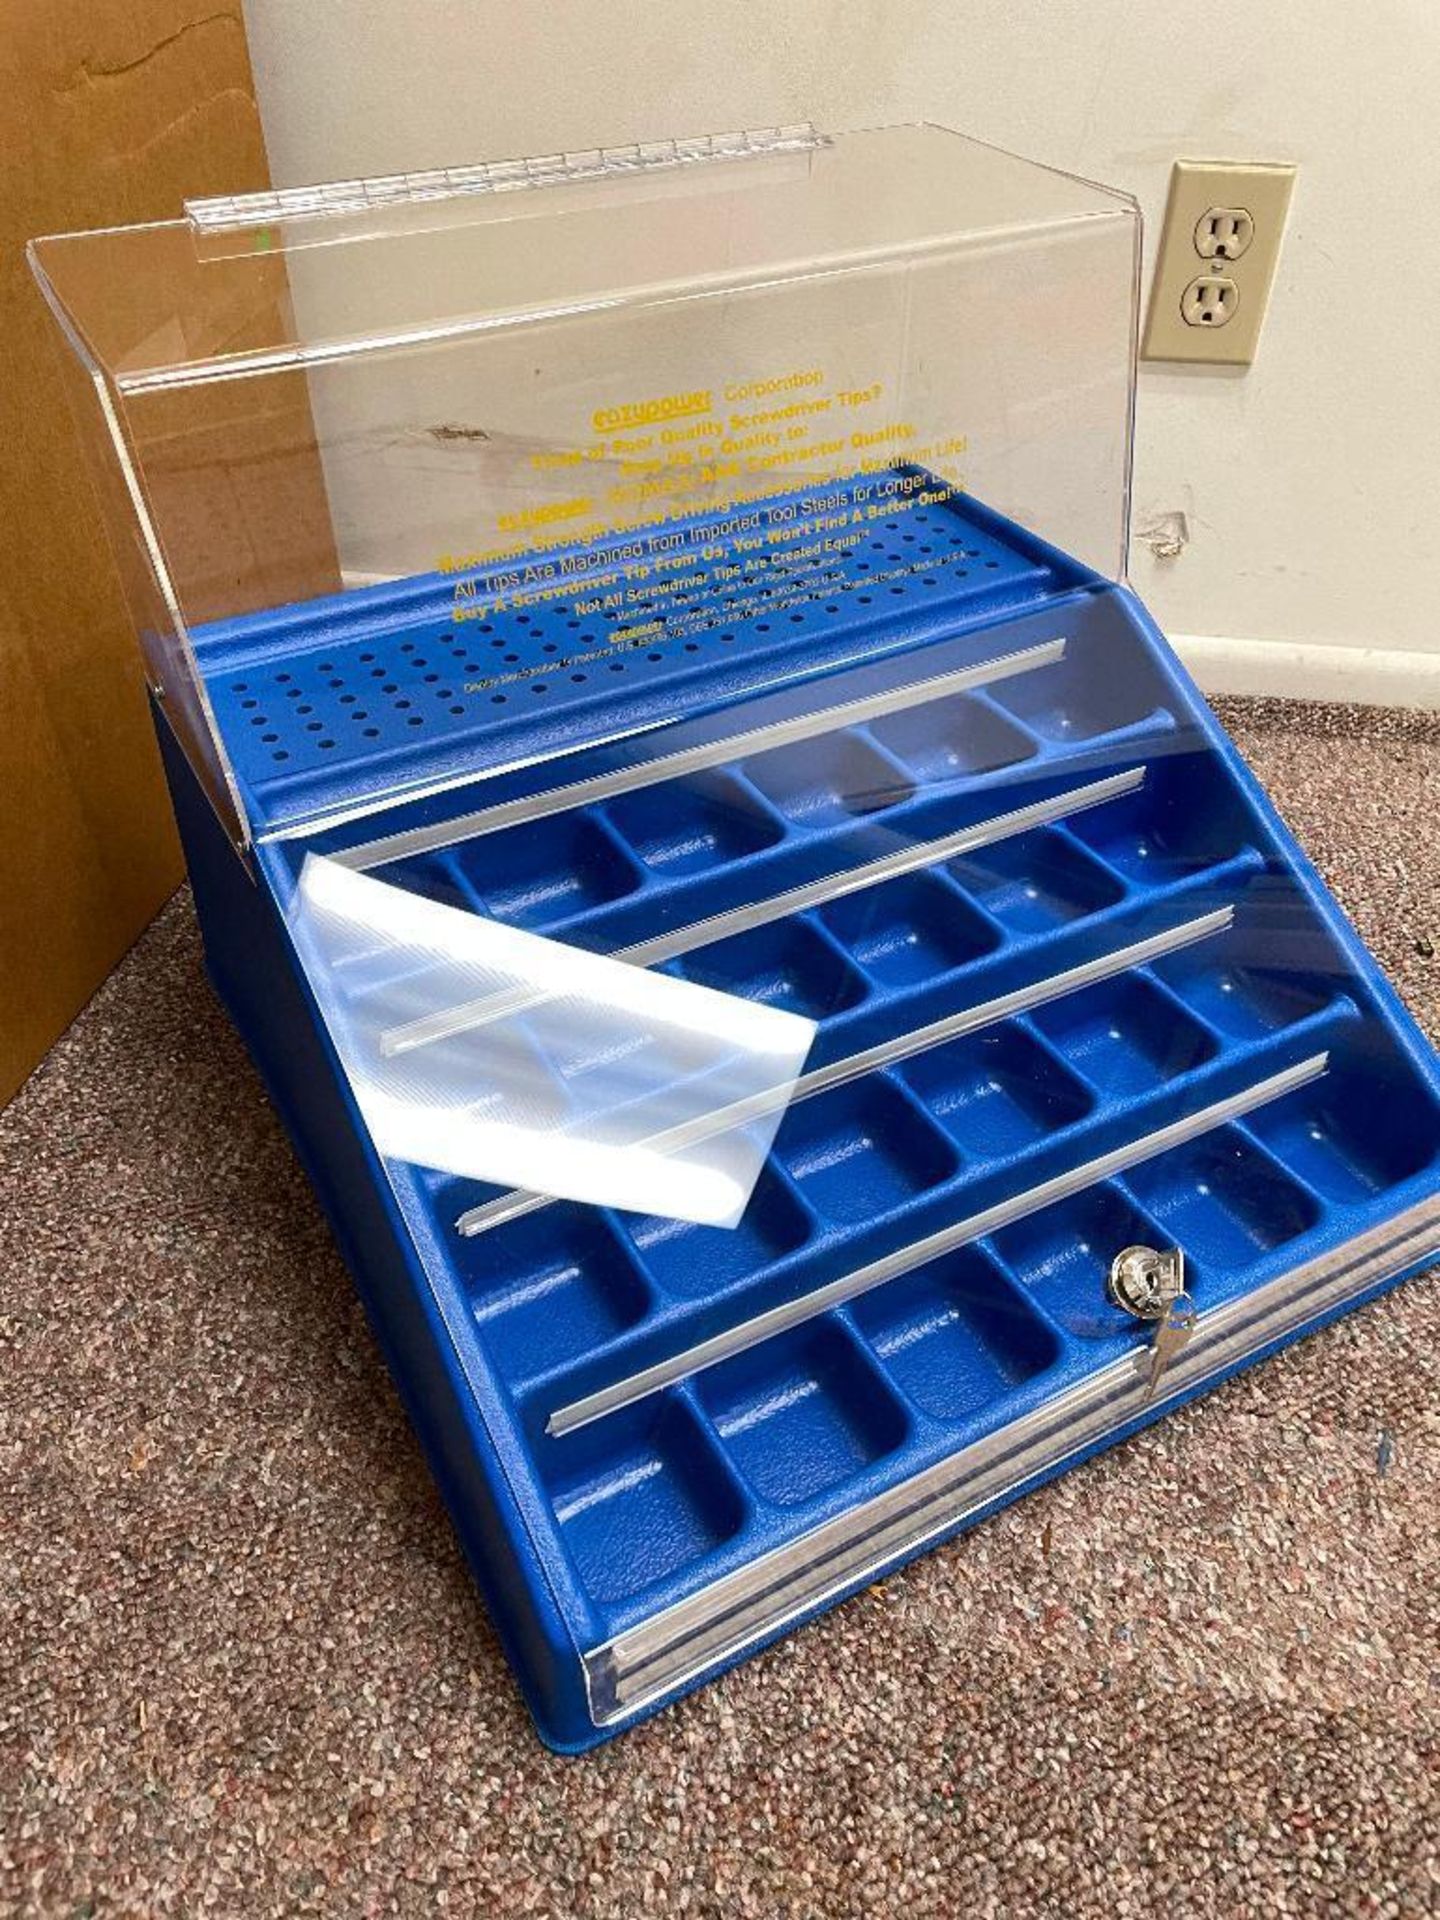 (2) PLASTIC AND PLEXI GLASS BIT DISPLAY CASES / ORGANIZERS. W/ LOCK AND KEY. THIS LOT IS: ONE MONEY